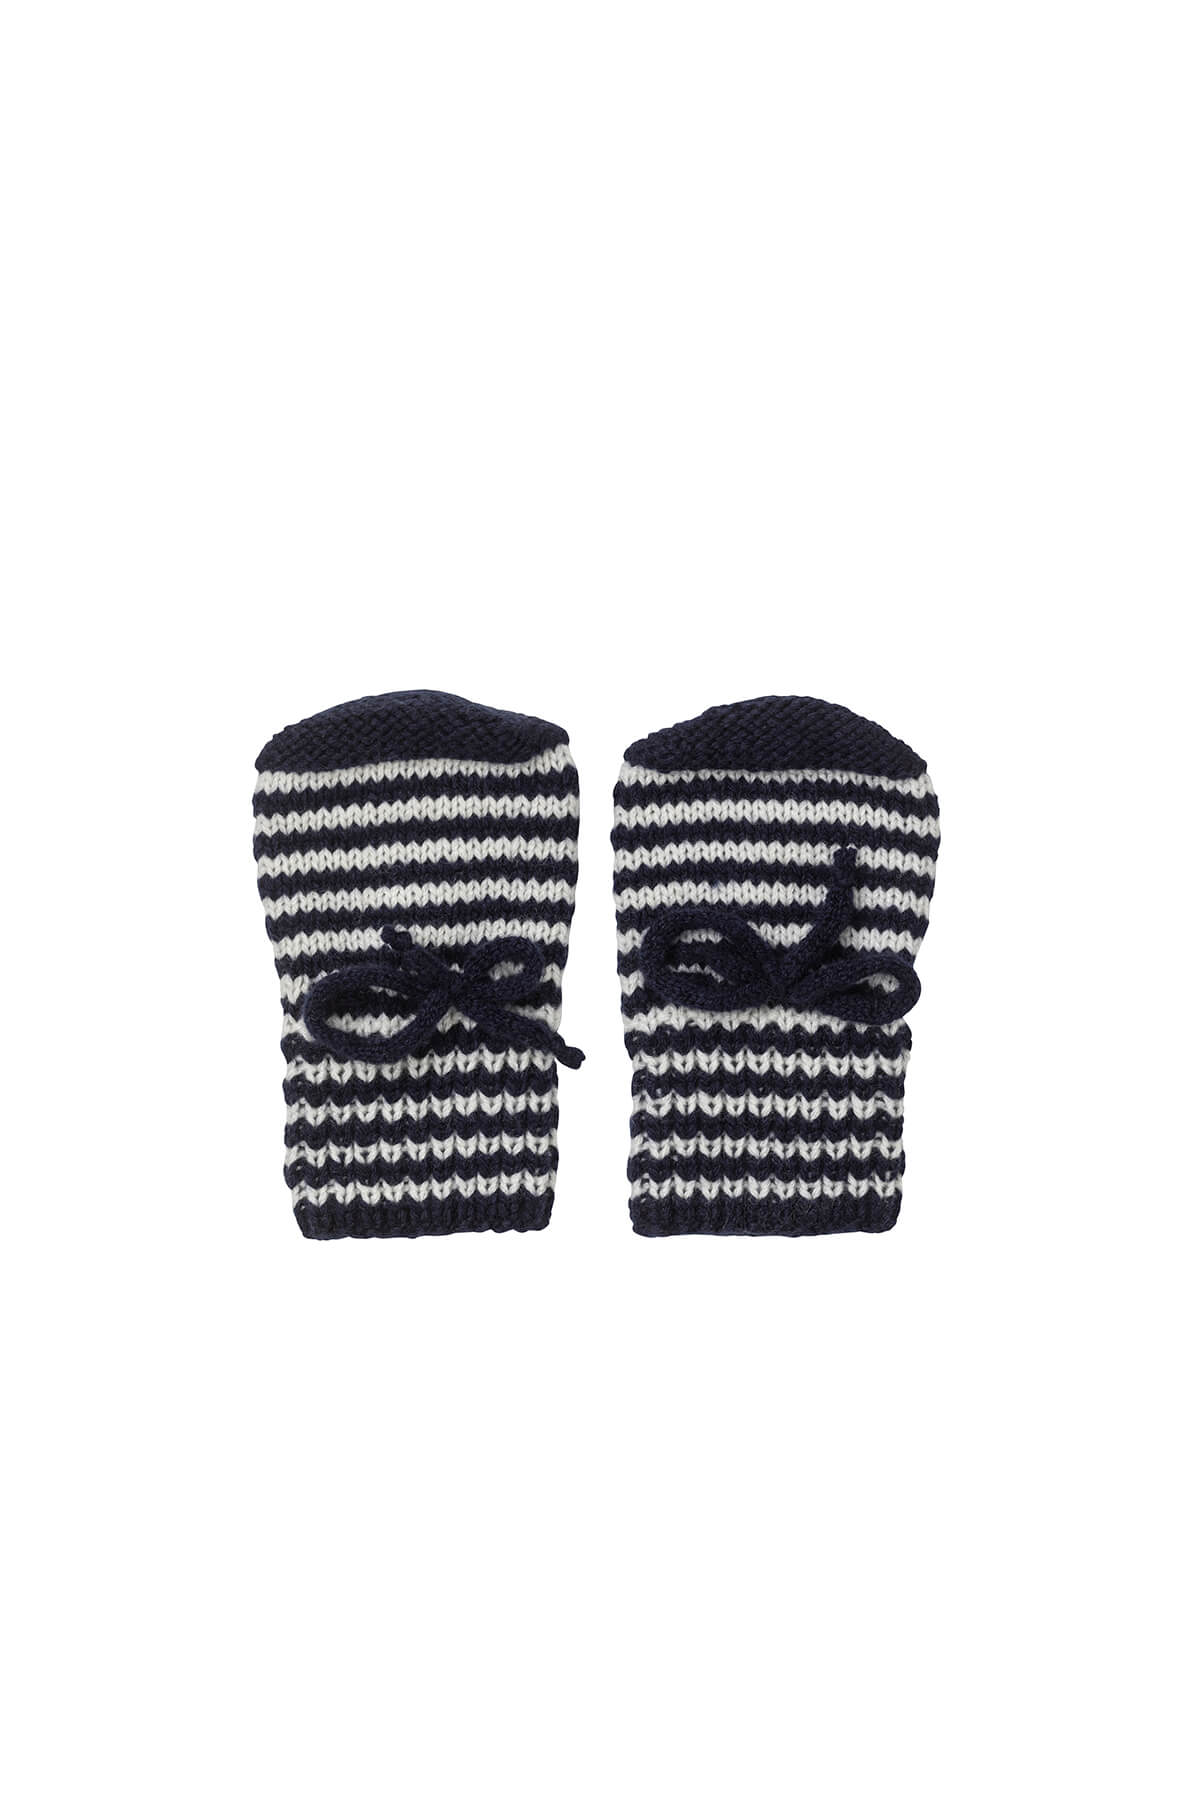 Johnstons of Elgin Hand Knitted Stripe Cashmere Baby Mittens in Navy & White on white background 746340333